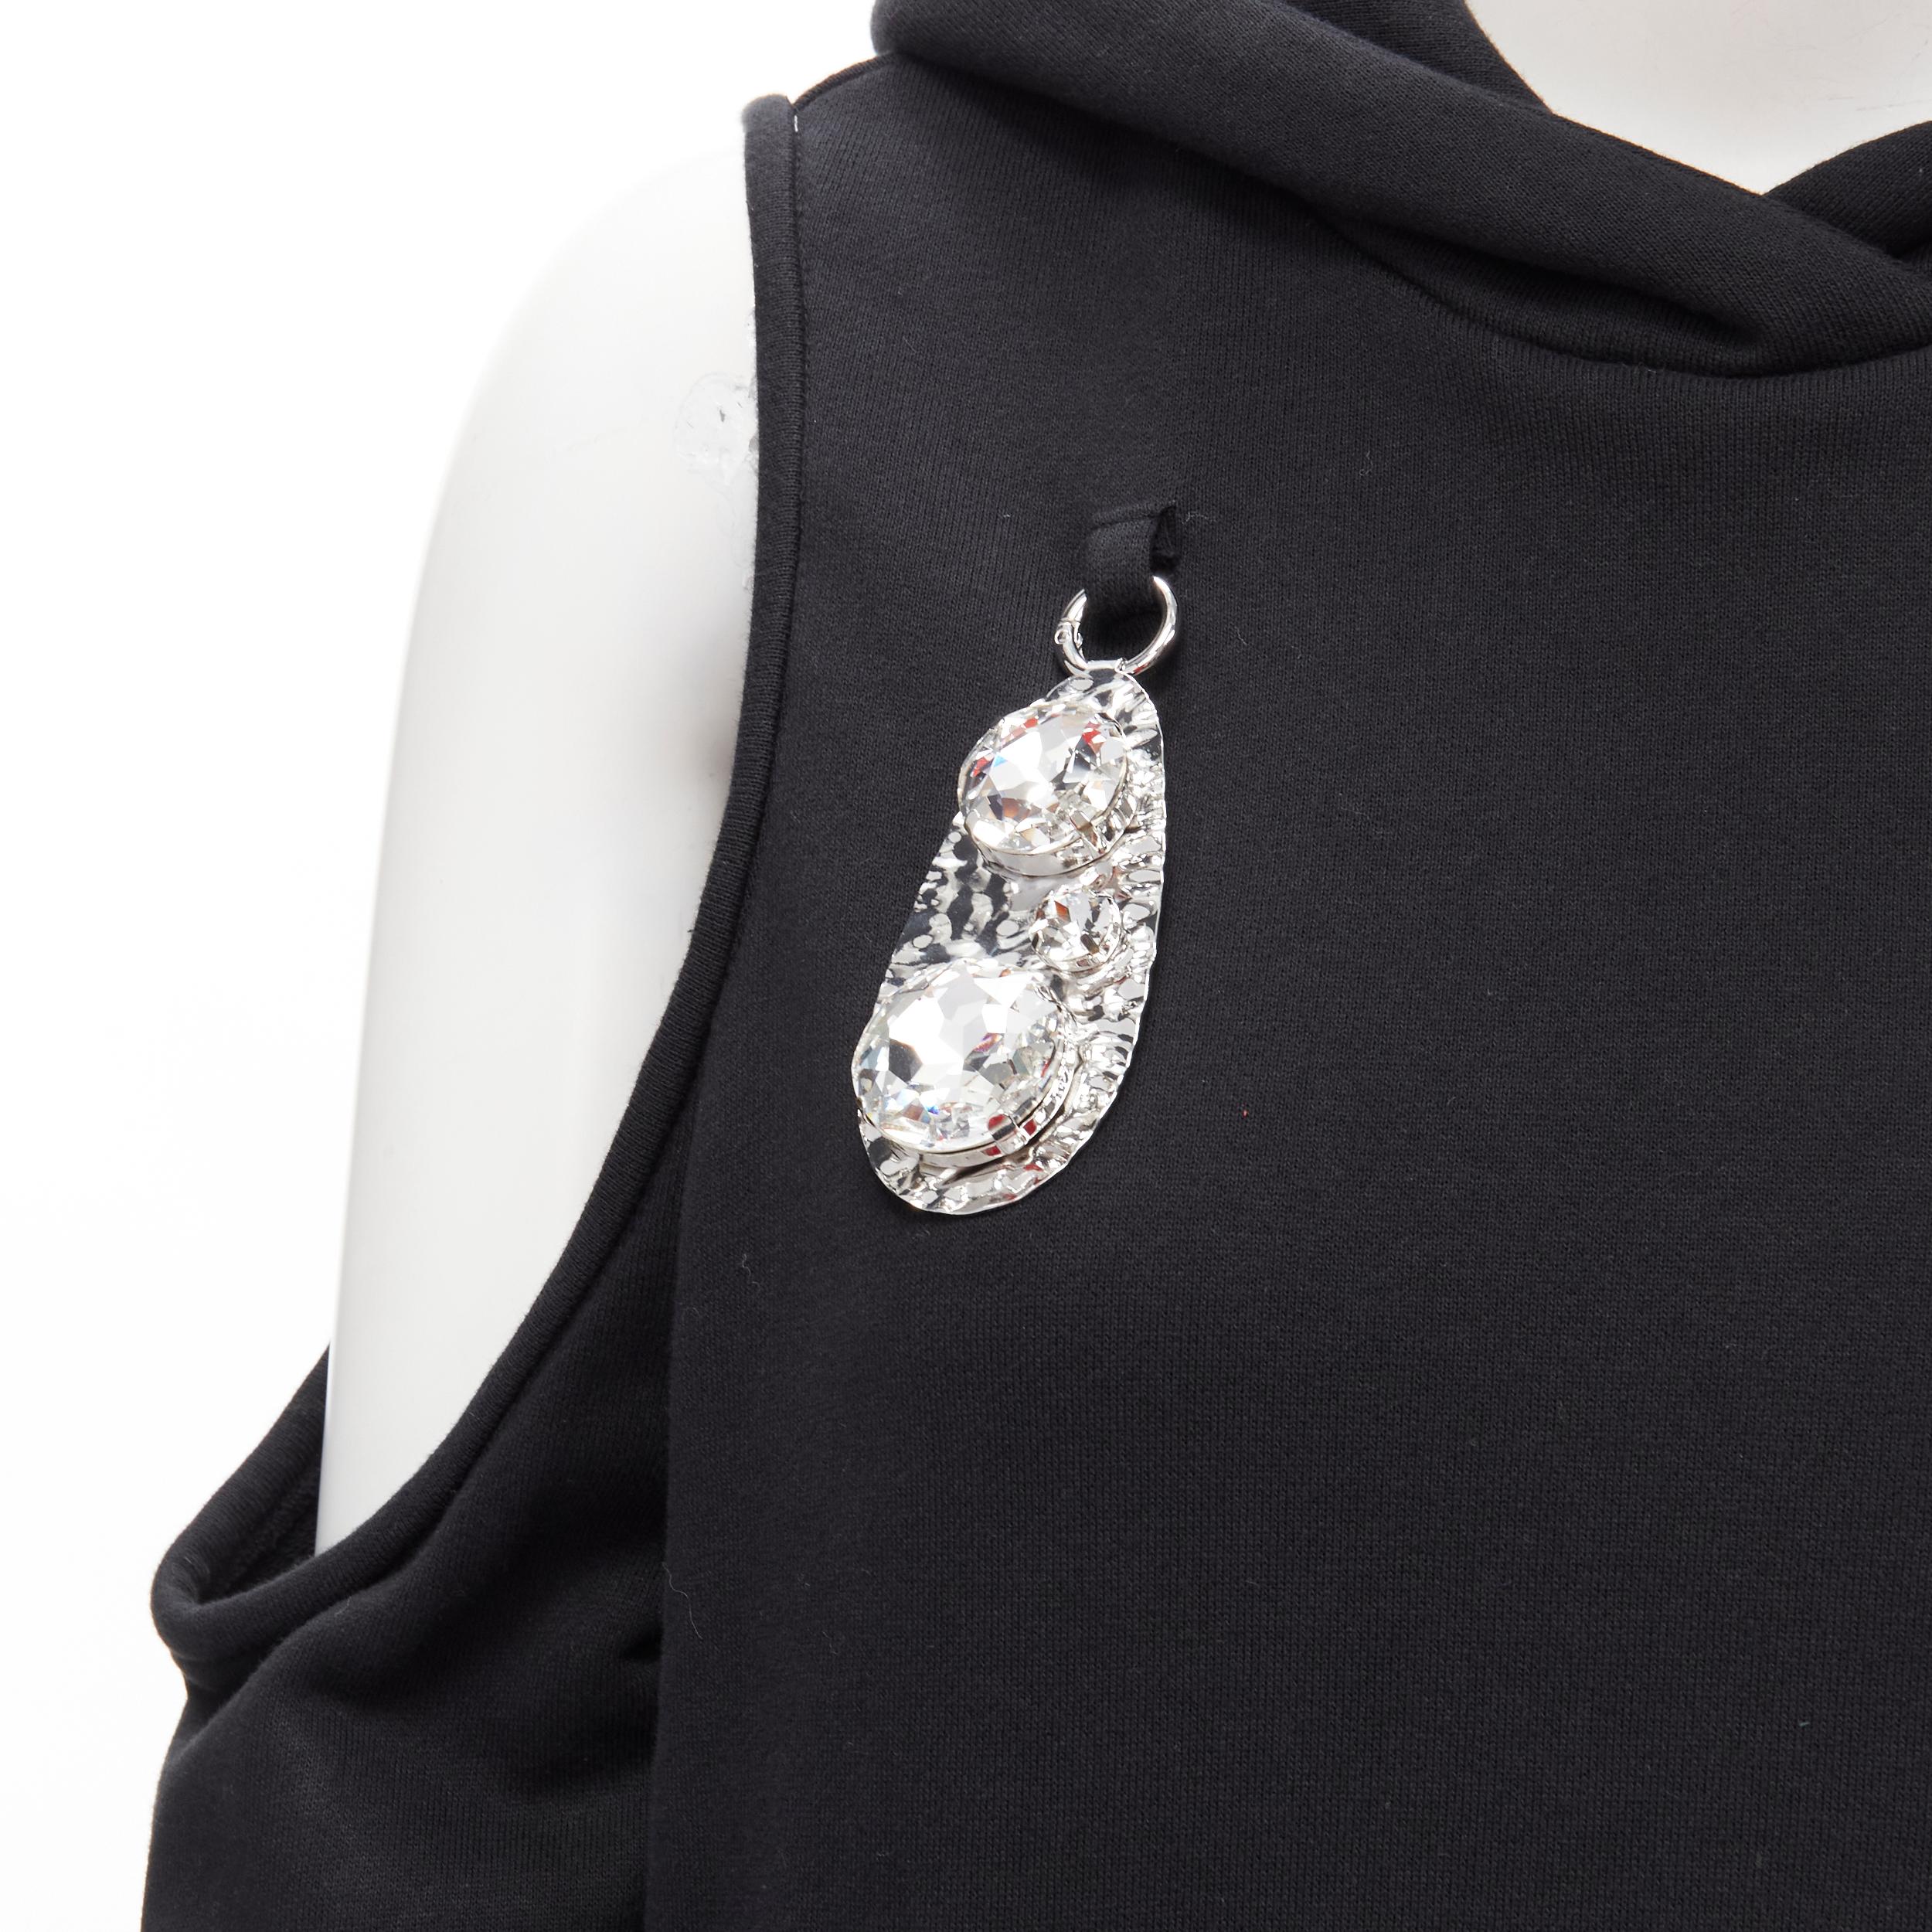 AREA crystal hammered pendant black cold shoulder hoodie XS
Reference: AAWC/A00416
Brand: Area
Material: Cotton
Color: Black, Silver
Pattern: Solid
Closure: Pullover
Extra Details: Pendants are removable for wash.
Made in: United